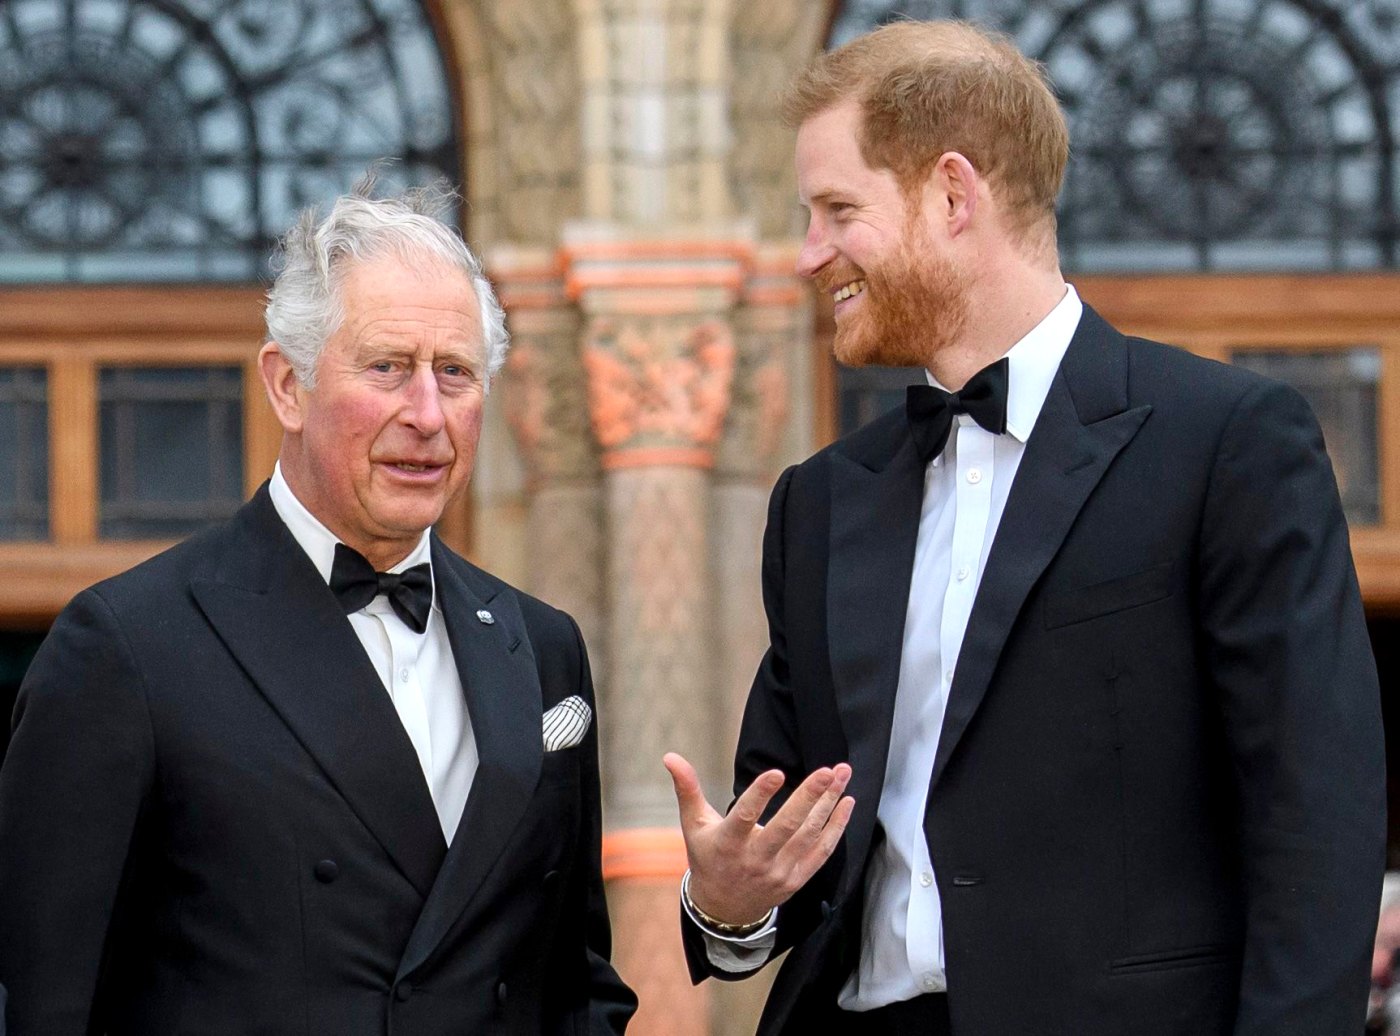 Prince Charles, Prince Harry Relationship Has 'Absolutely' Improved